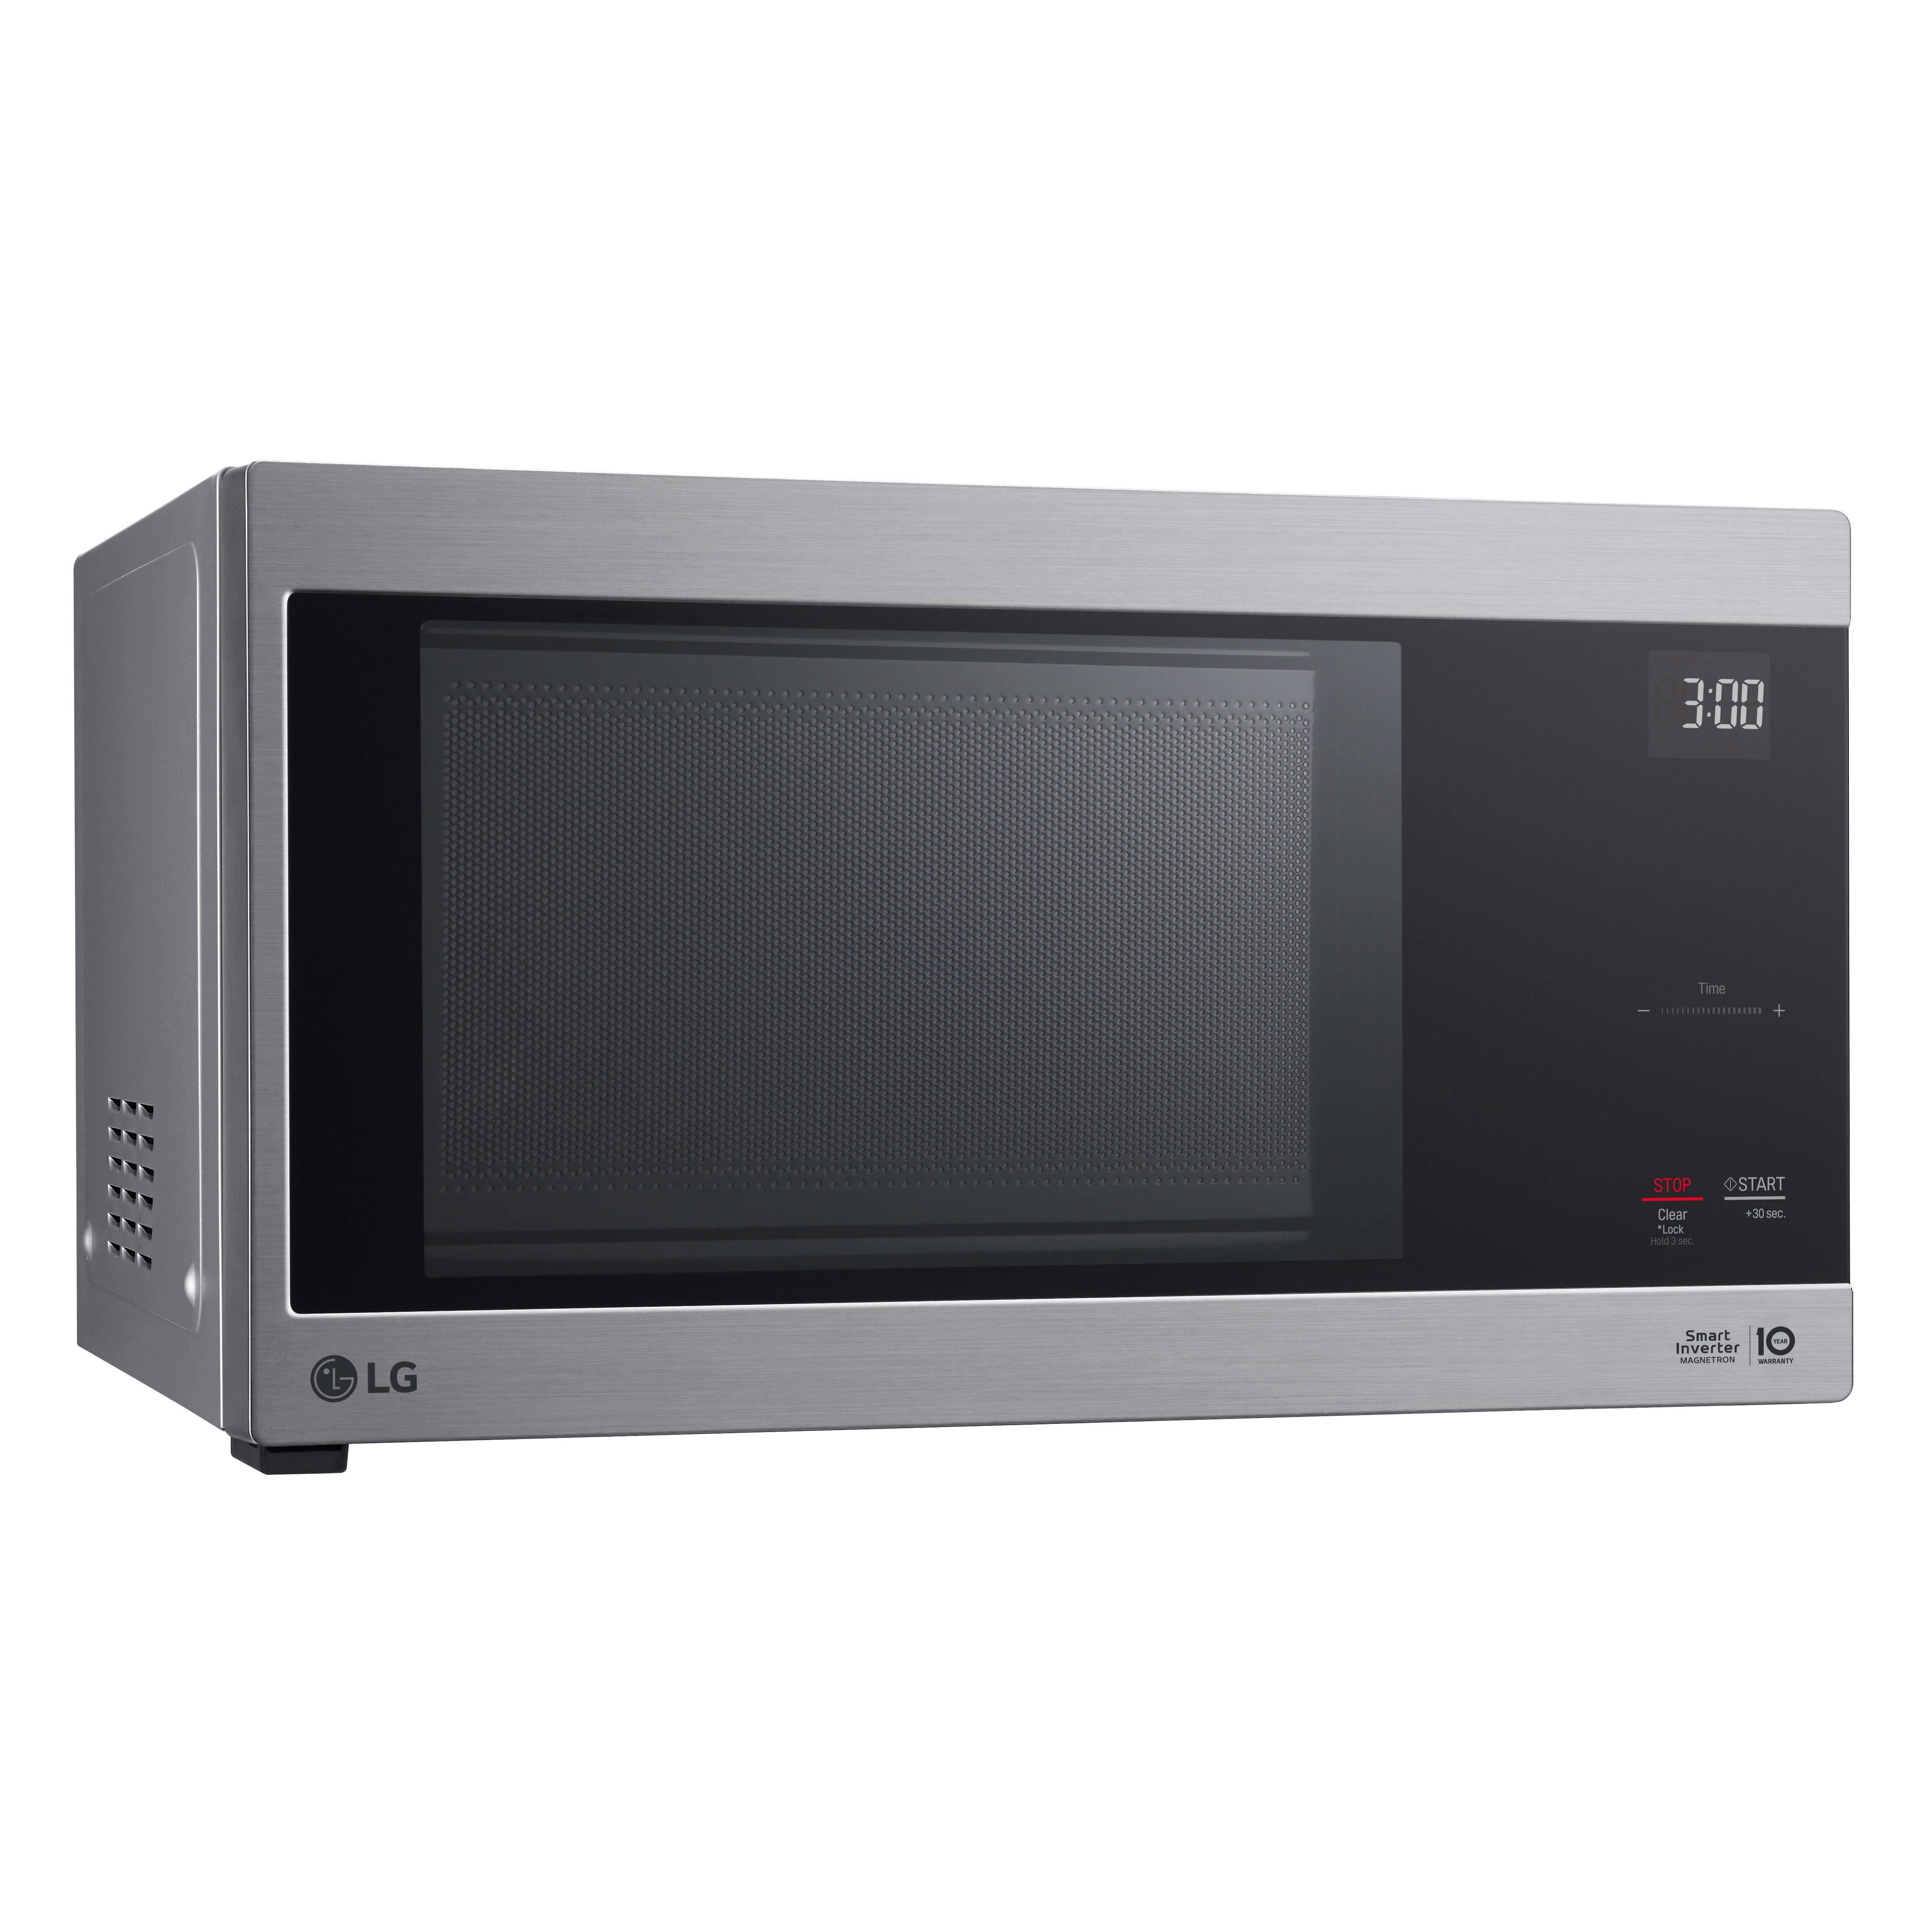 LG Neo Chef 1.5 cu. ft. Countertop Microwave Oven, 1200 Watts, Stainless Steel - image 4 of 15